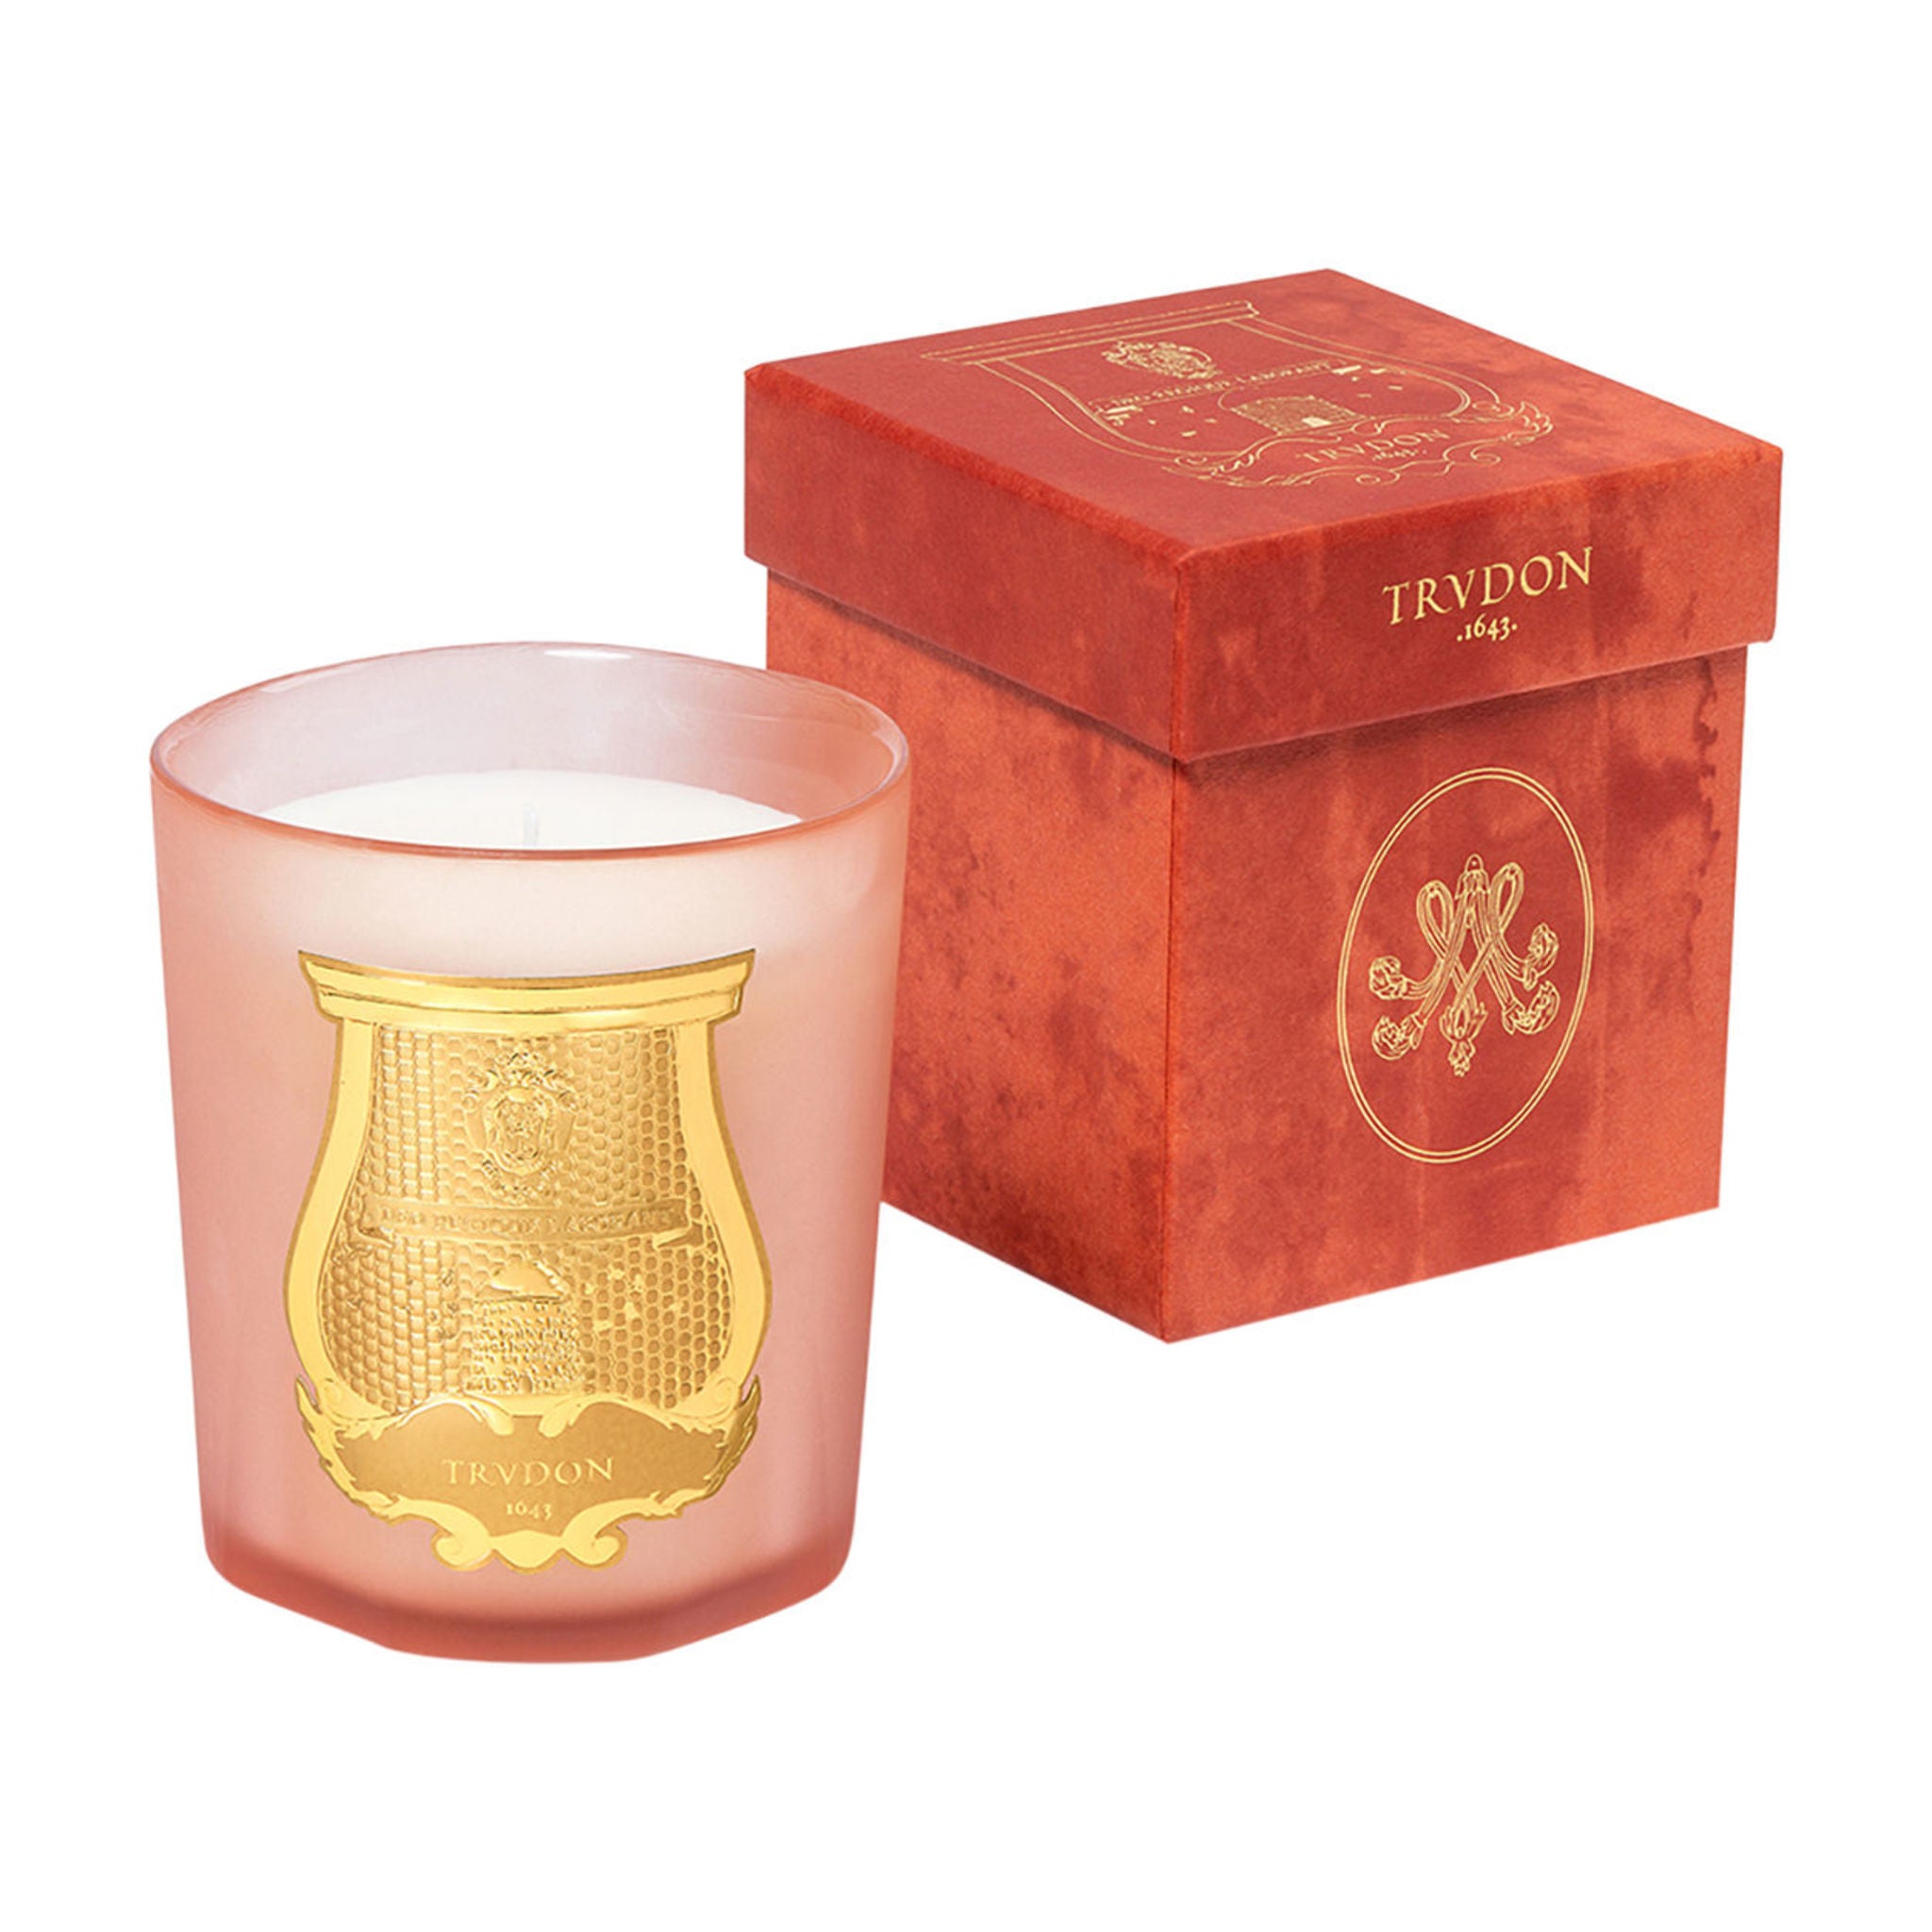 Trudon Tuileries Classic Candle Size variant: 9.5 oz main image.